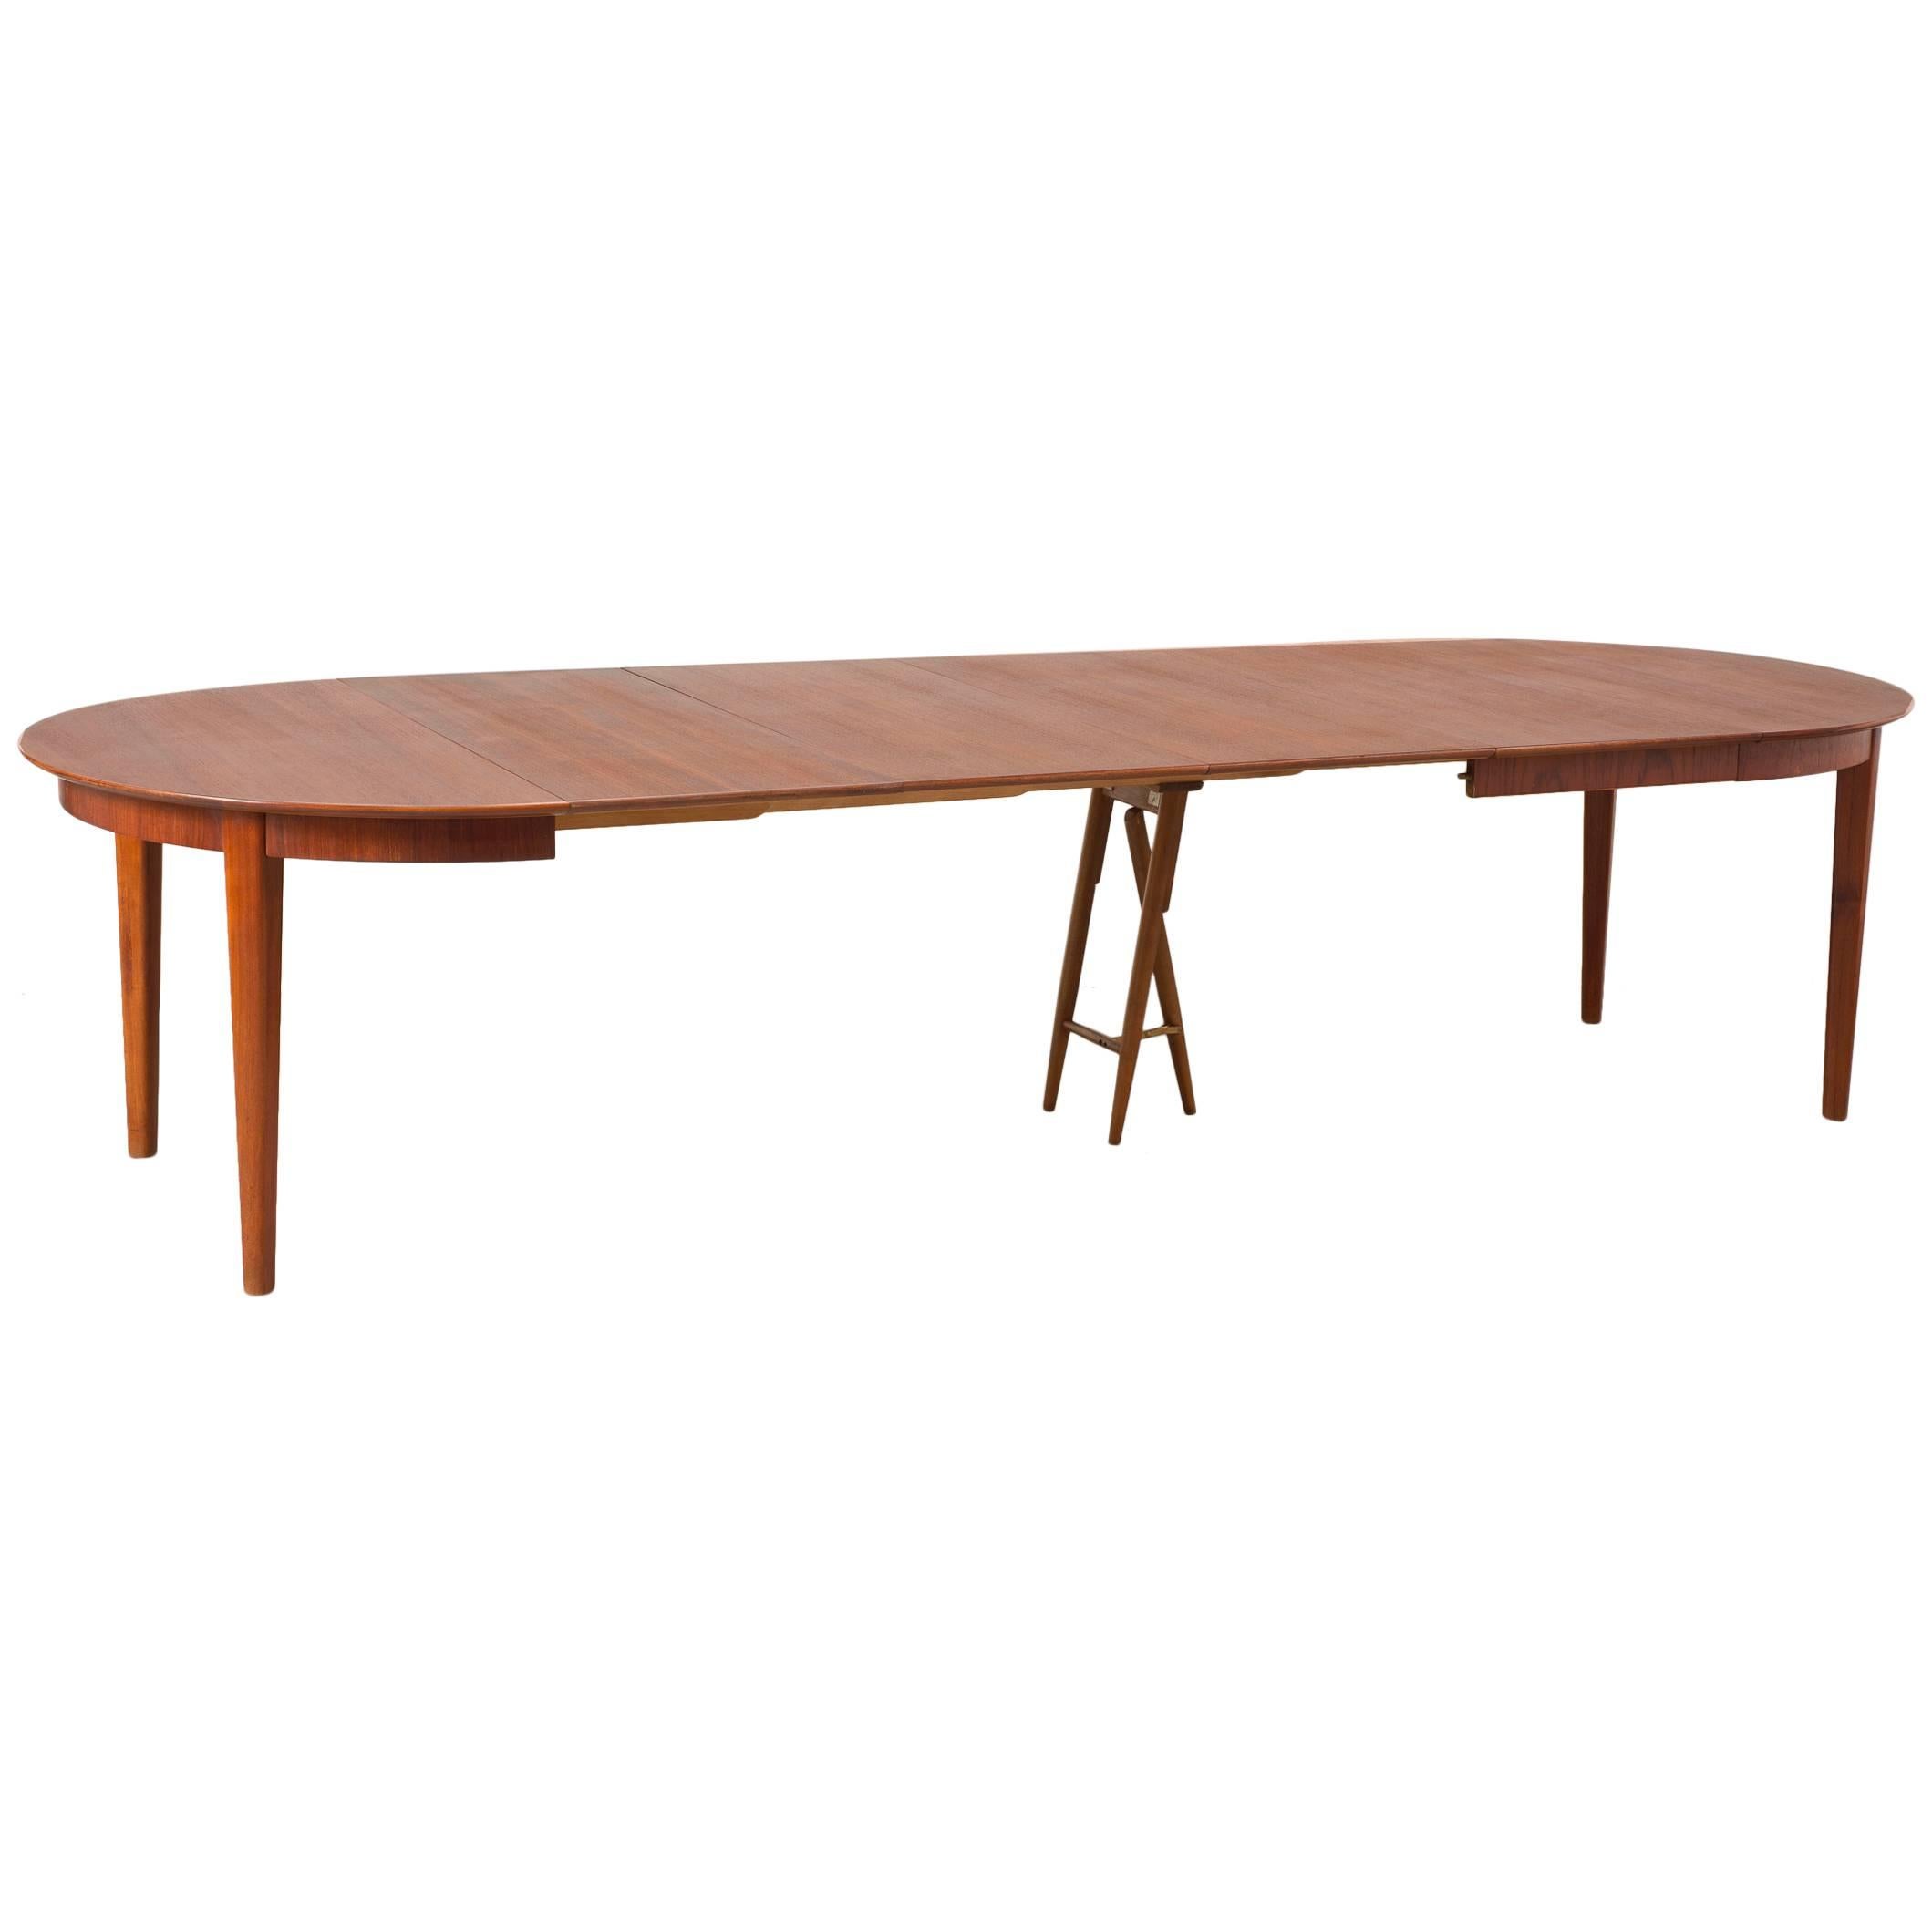 Henning Kjaernulf Teak Dining Table with Four Leaves